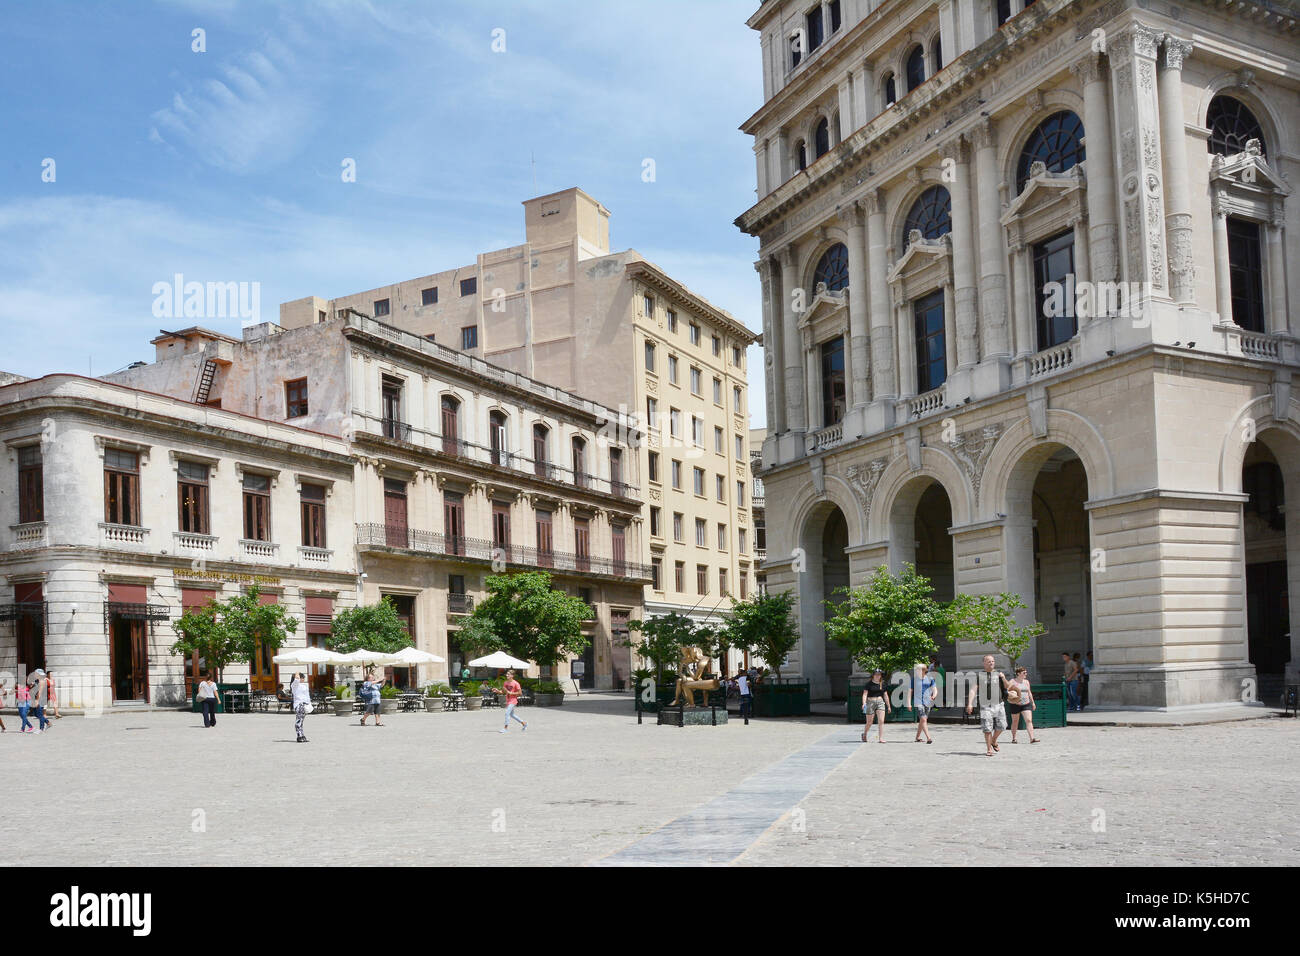 HAVANA, CUBA - JULY 21,2016: Plaza de San Francisco. The plaza is one of four plazas laid out in the 17th century, it takes its name from the Francisc Stock Photo